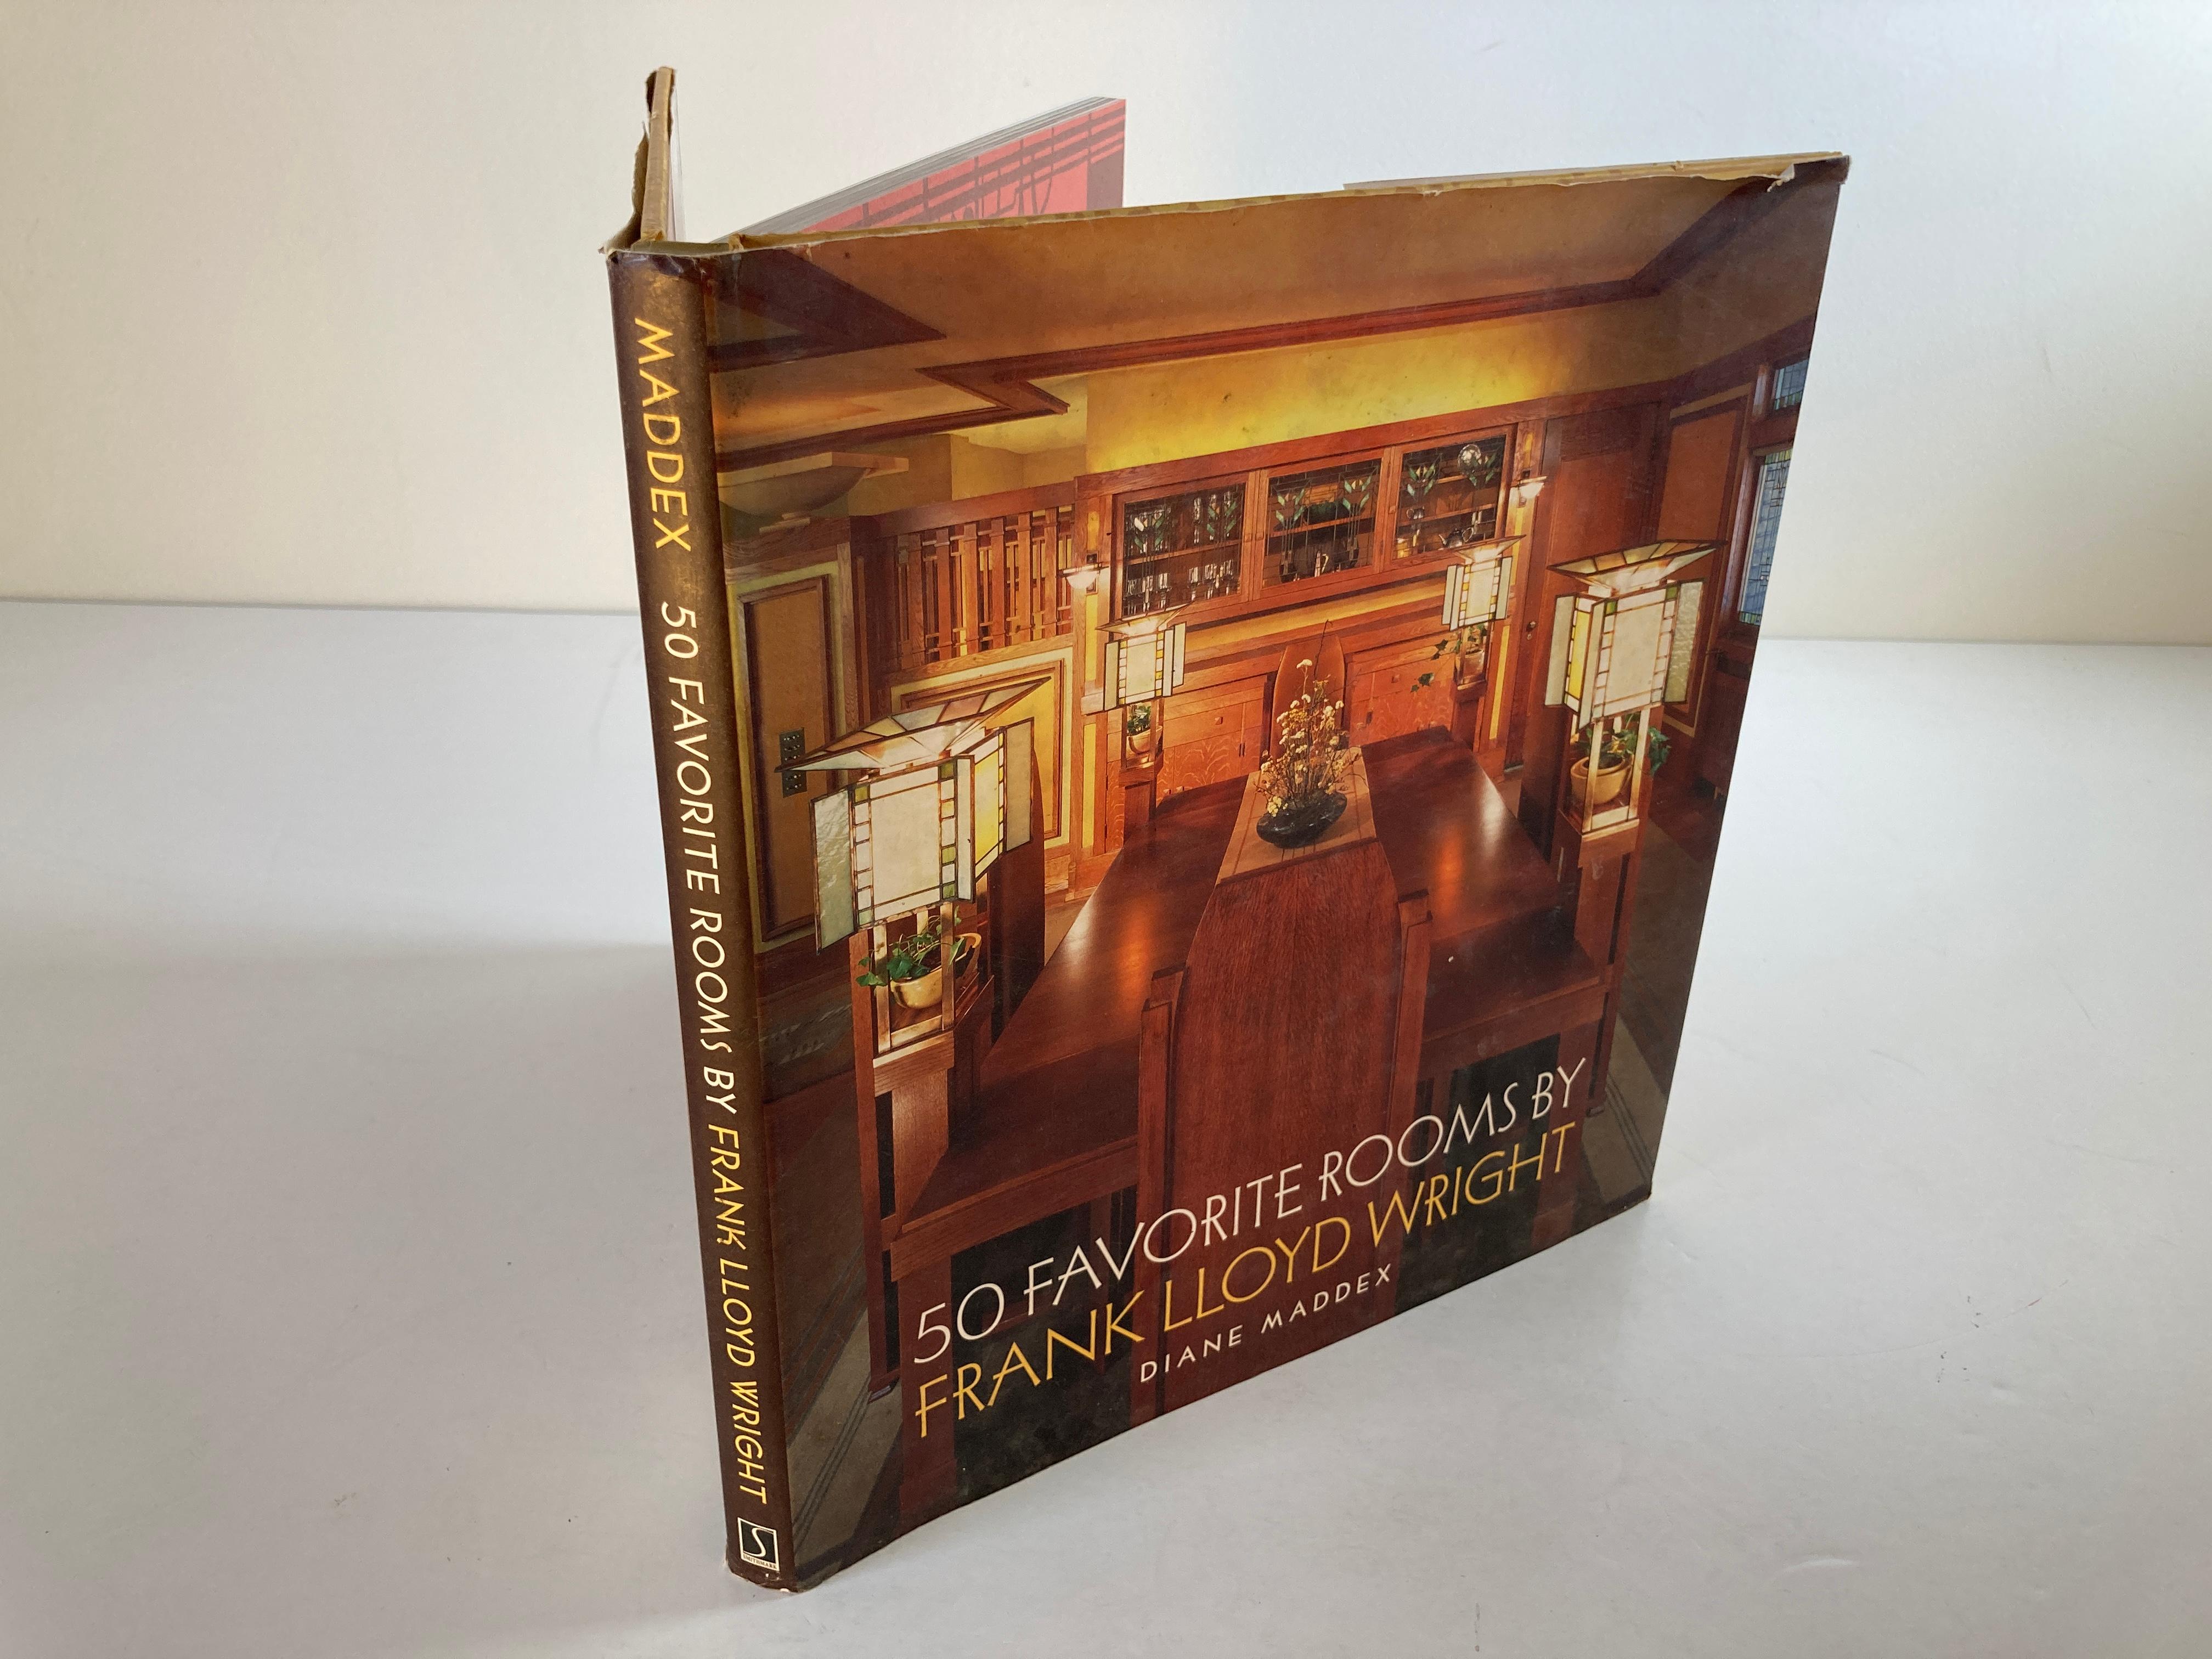 North American Fifty Favorite Rooms by Frank Lloyd Wright Hardcover Book